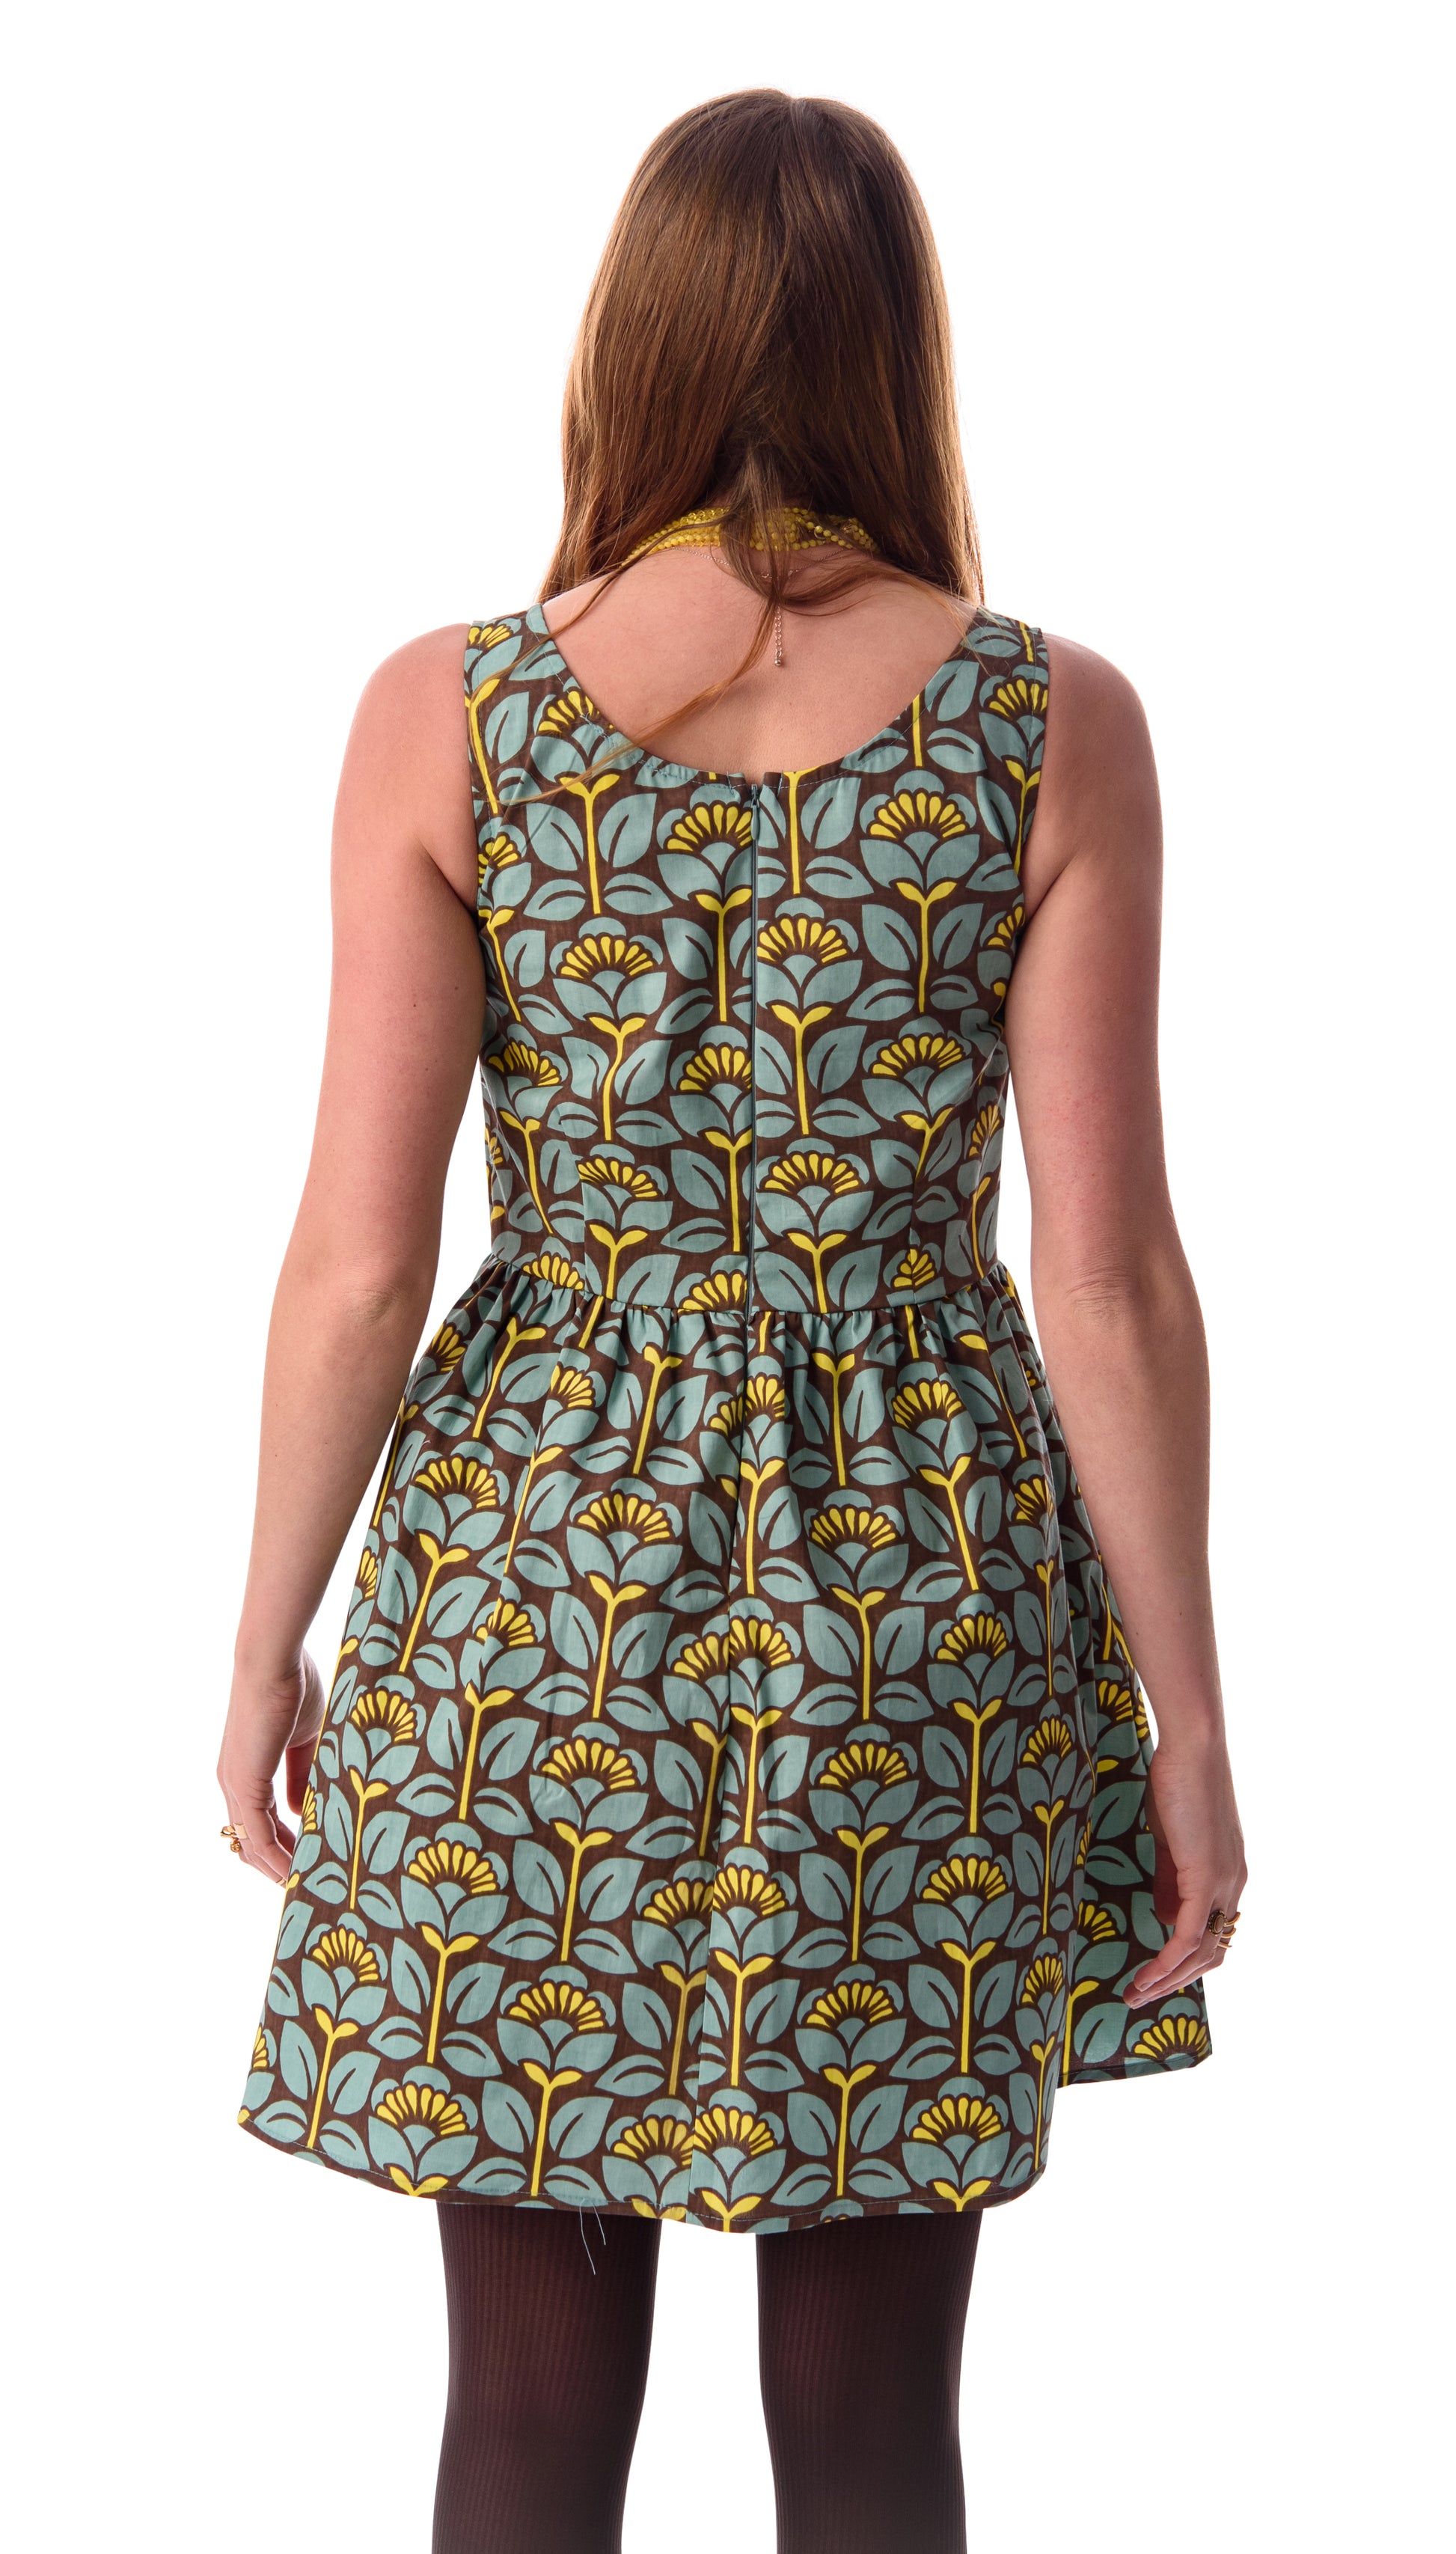 Back view of light blue, yellow and brown geometric floral retro print sleeveless fit and flare short dress